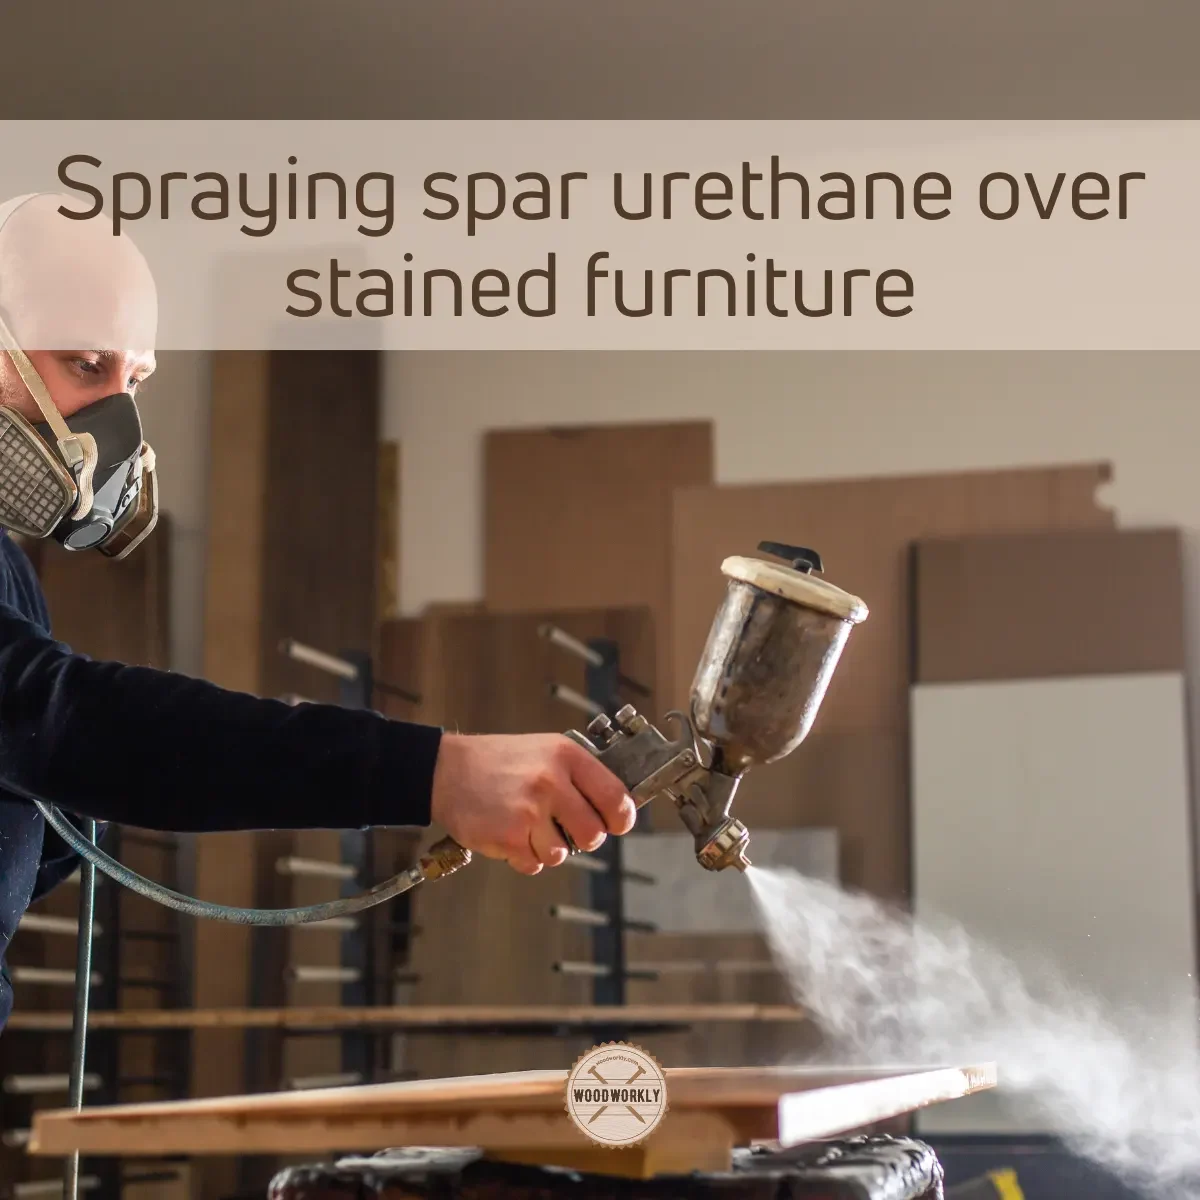 Spraying spar urethane over stained furniture